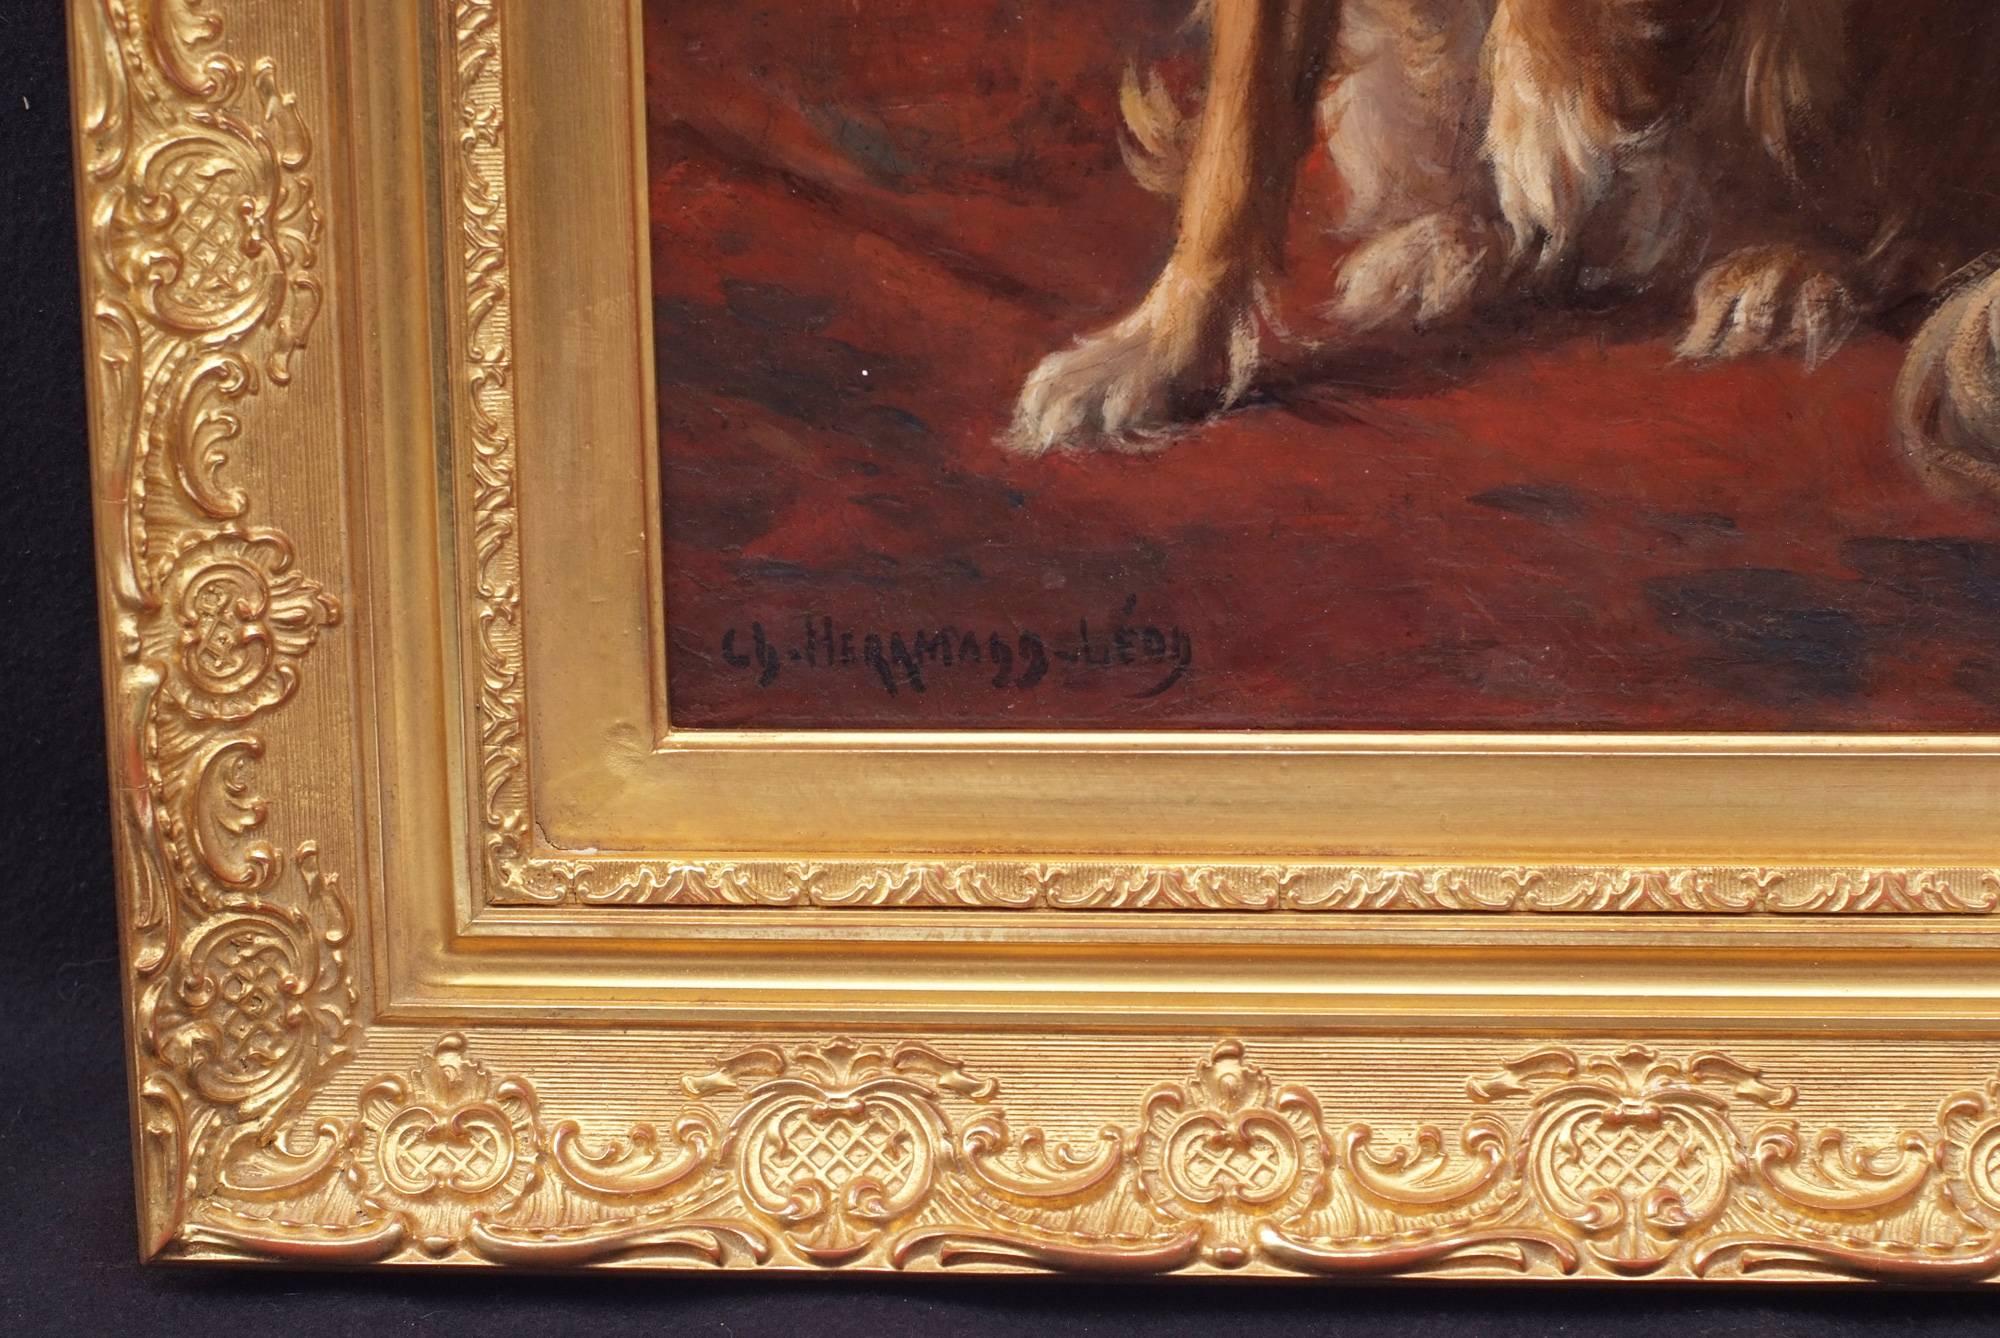 Painting 19th century - Portrait of a Dog in interior - Brown Interior Painting by Charles Herrmann-Léon